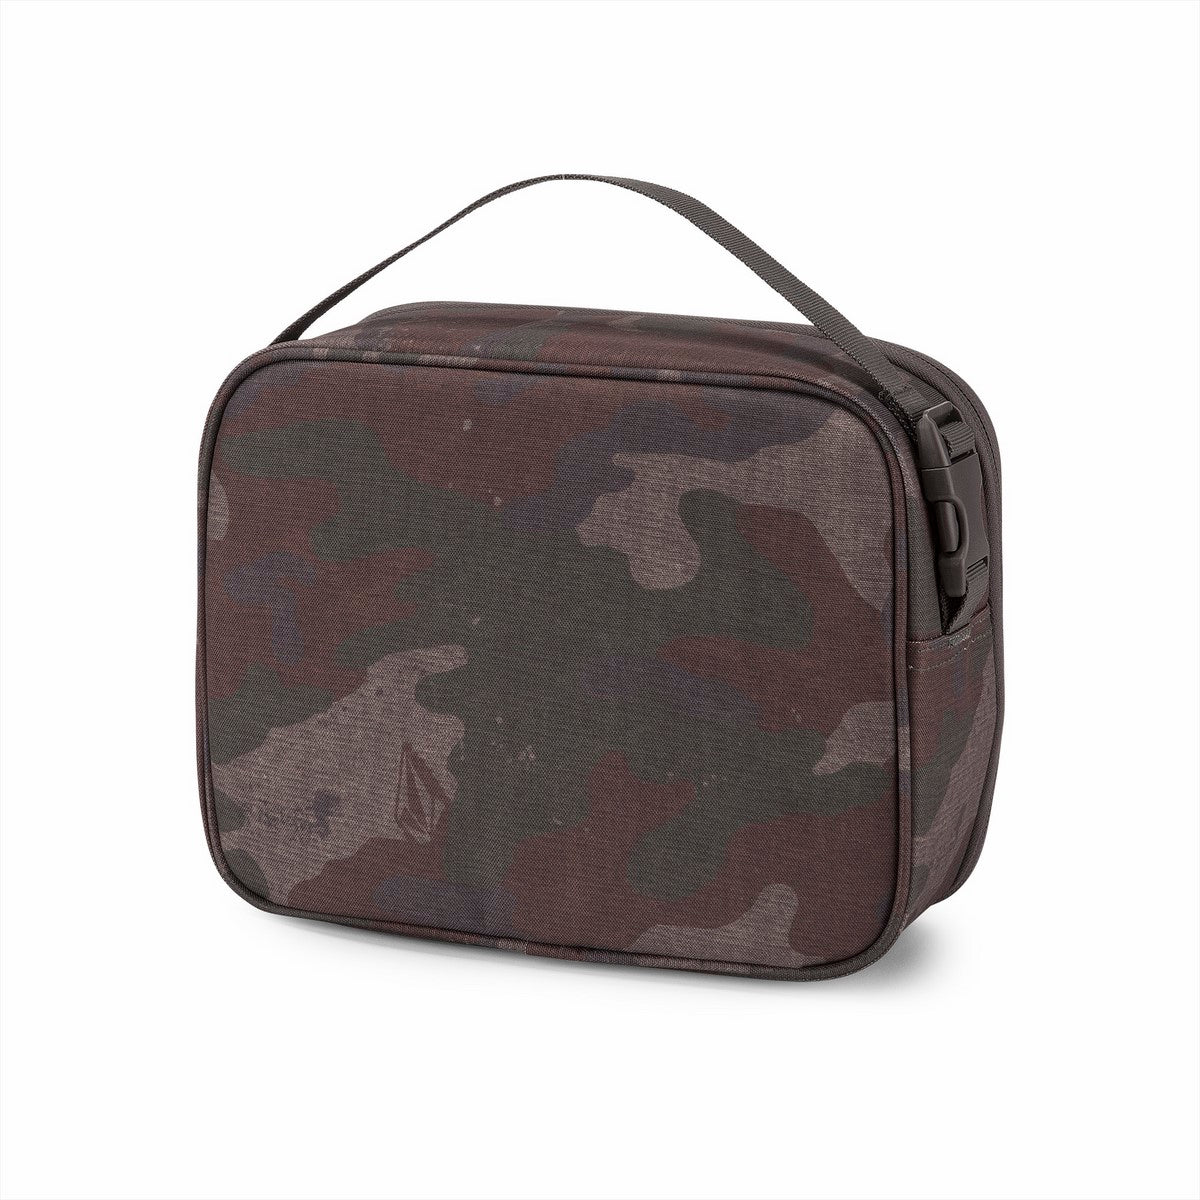 VOLCOM LUNCH BOX - ARMY GREEN COMBO